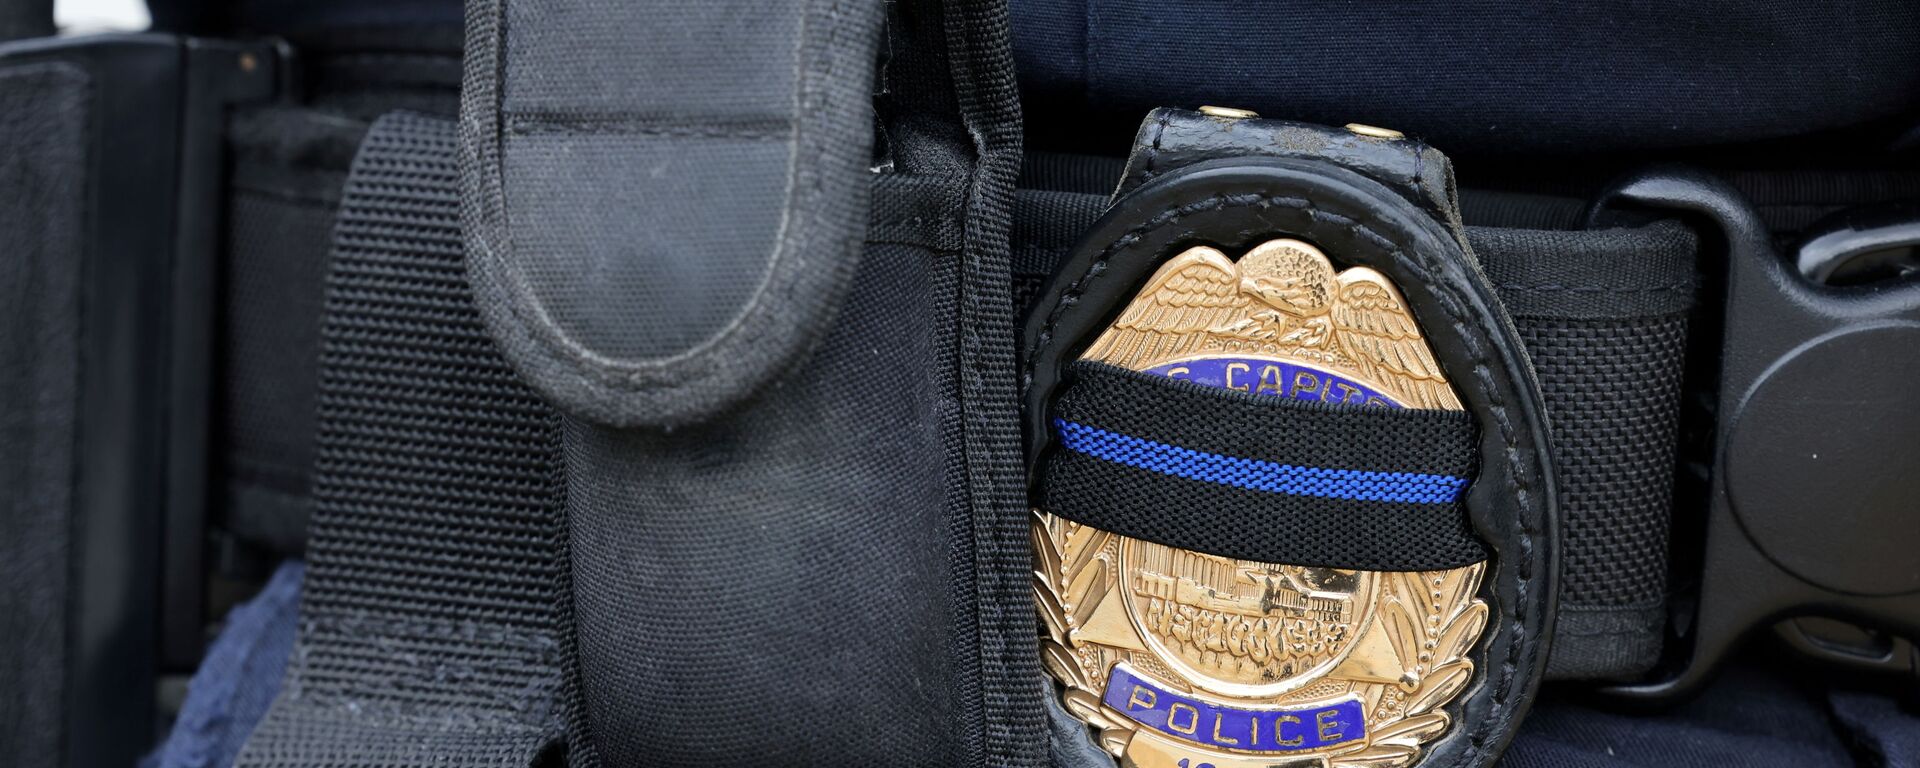 A U.S. Capitol police officer's badge shows a black stripe in honor of deceased colleagues as he guards the building on Capitol Hill in Washington, May 28, 2021. REUTERS/Evelyn Hockstein/File Photo - Sputnik International, 1920, 08.02.2022